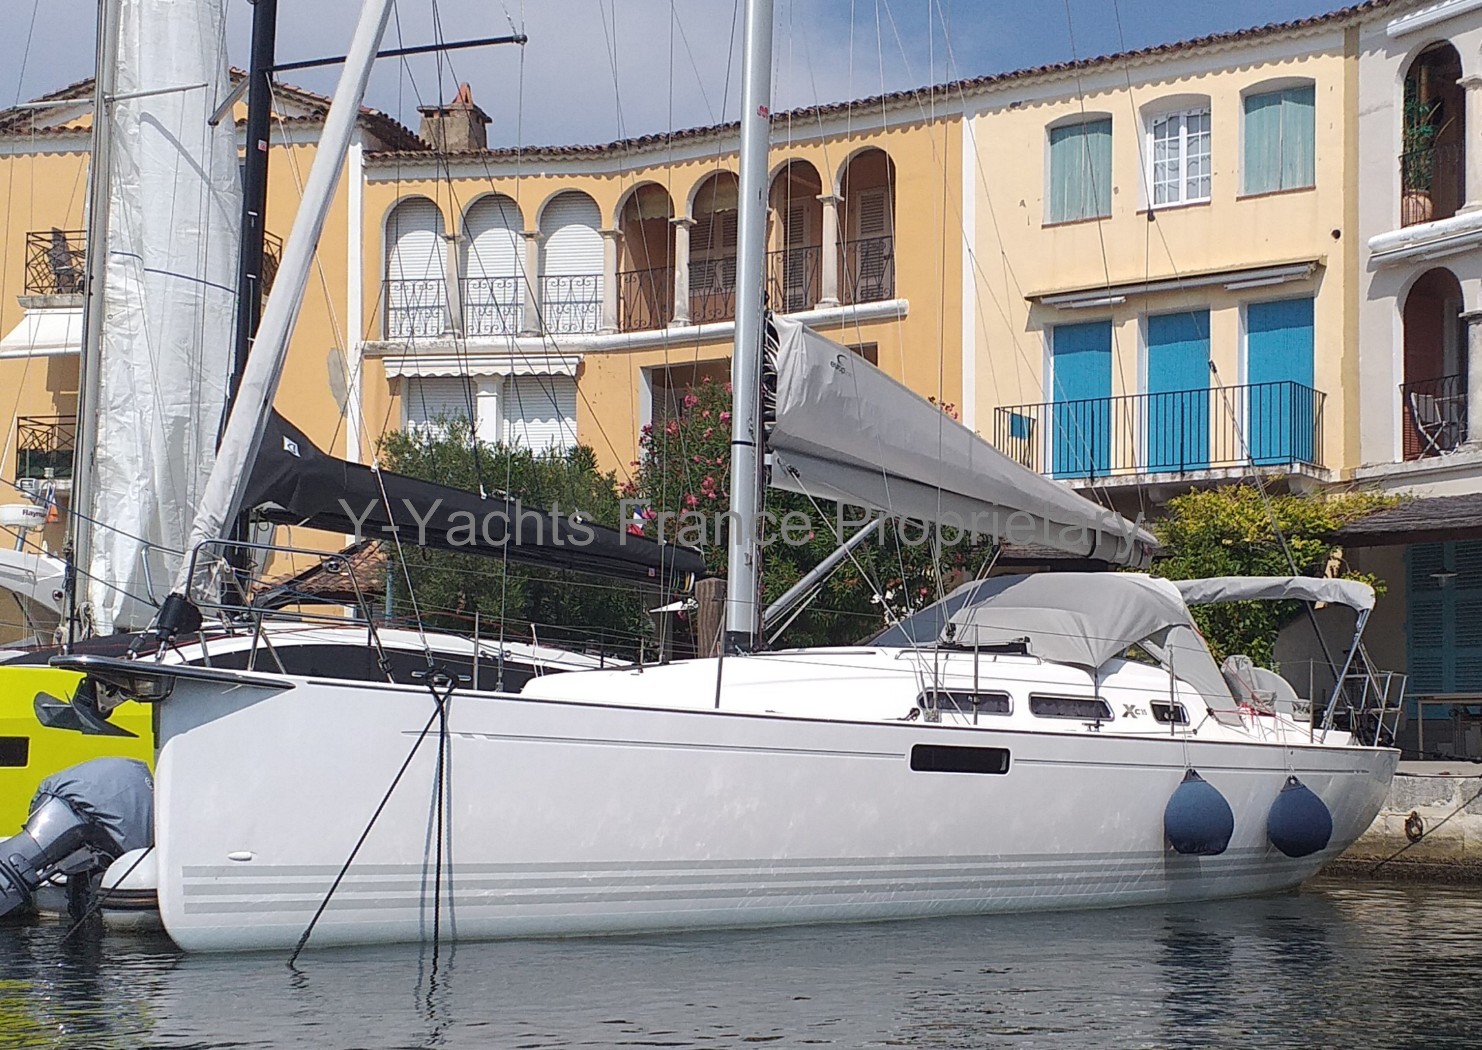 xc 35 yacht for sale